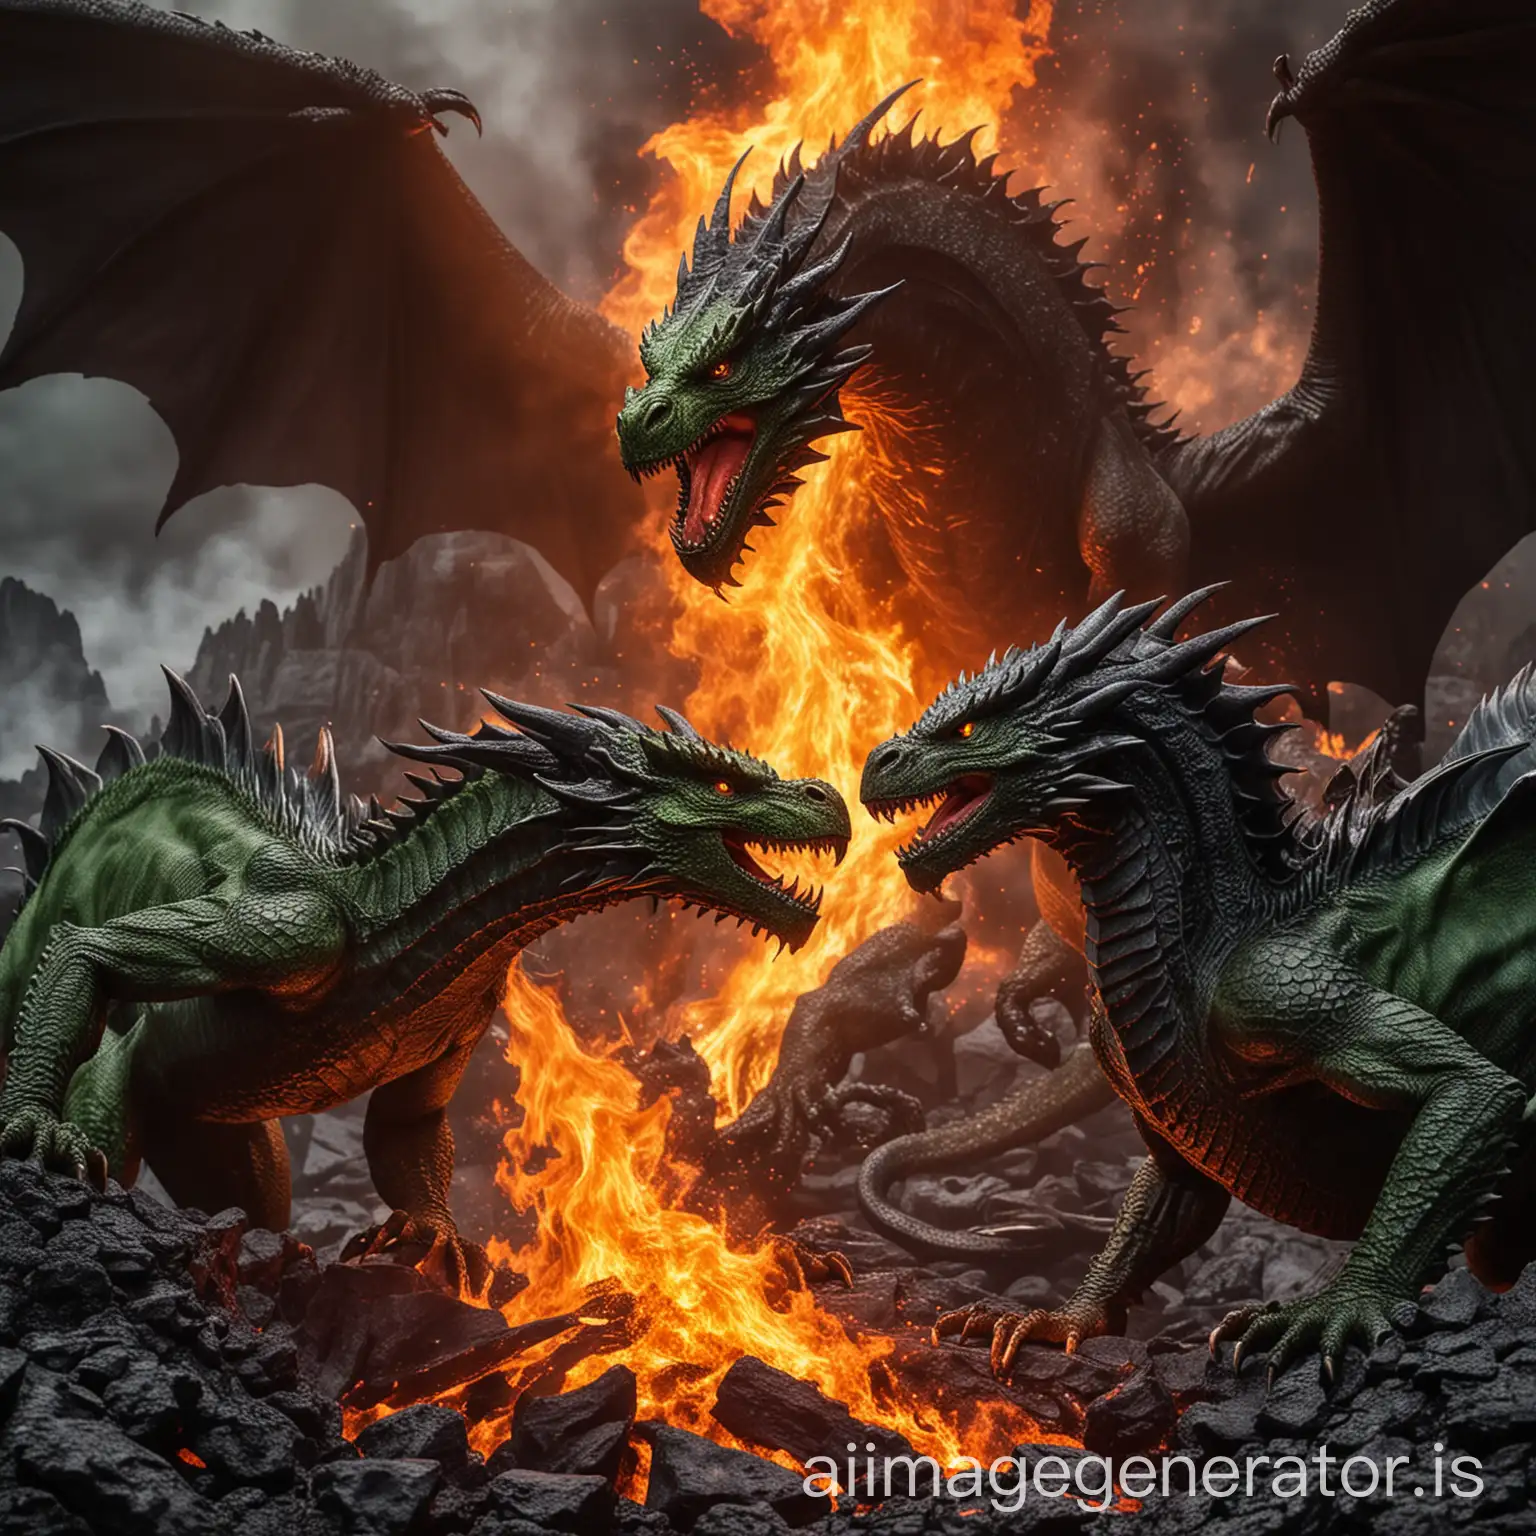 green dragon fighting black dragon blood and fire with lava in background